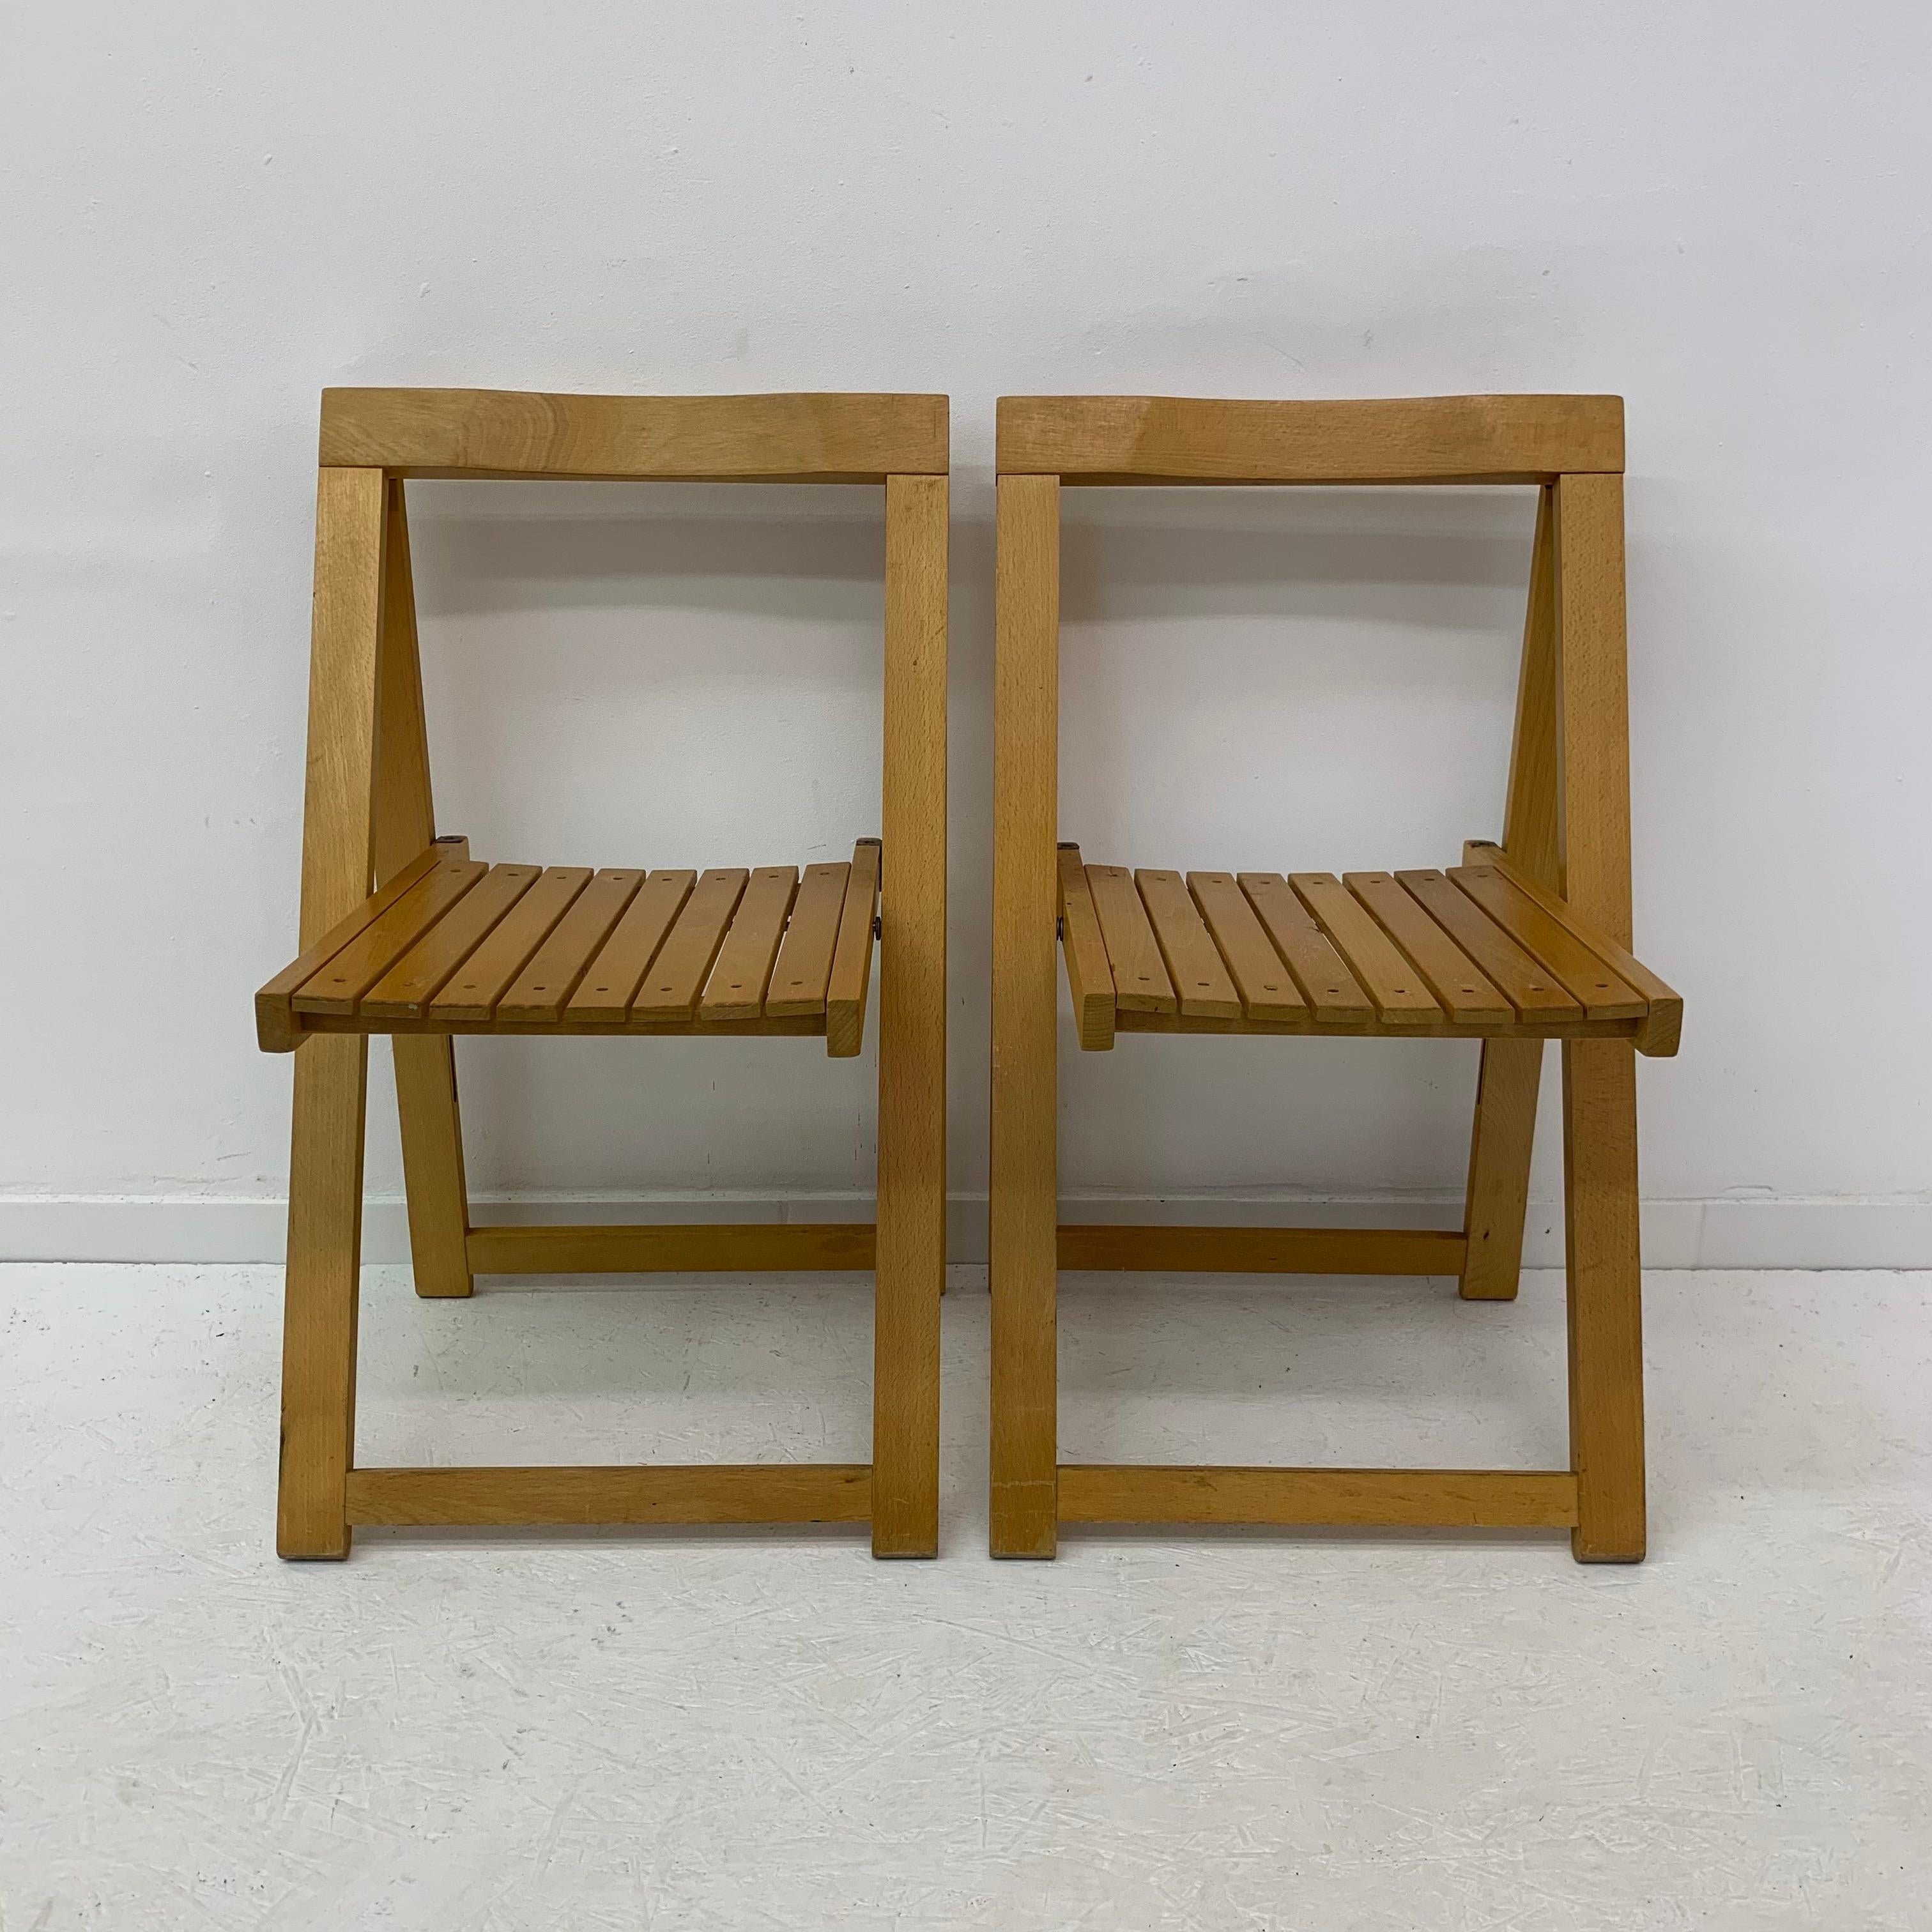 Set of 2 Aldo Jacober for Alberto Bazzani folding chairs, 1960’s For Sale 4